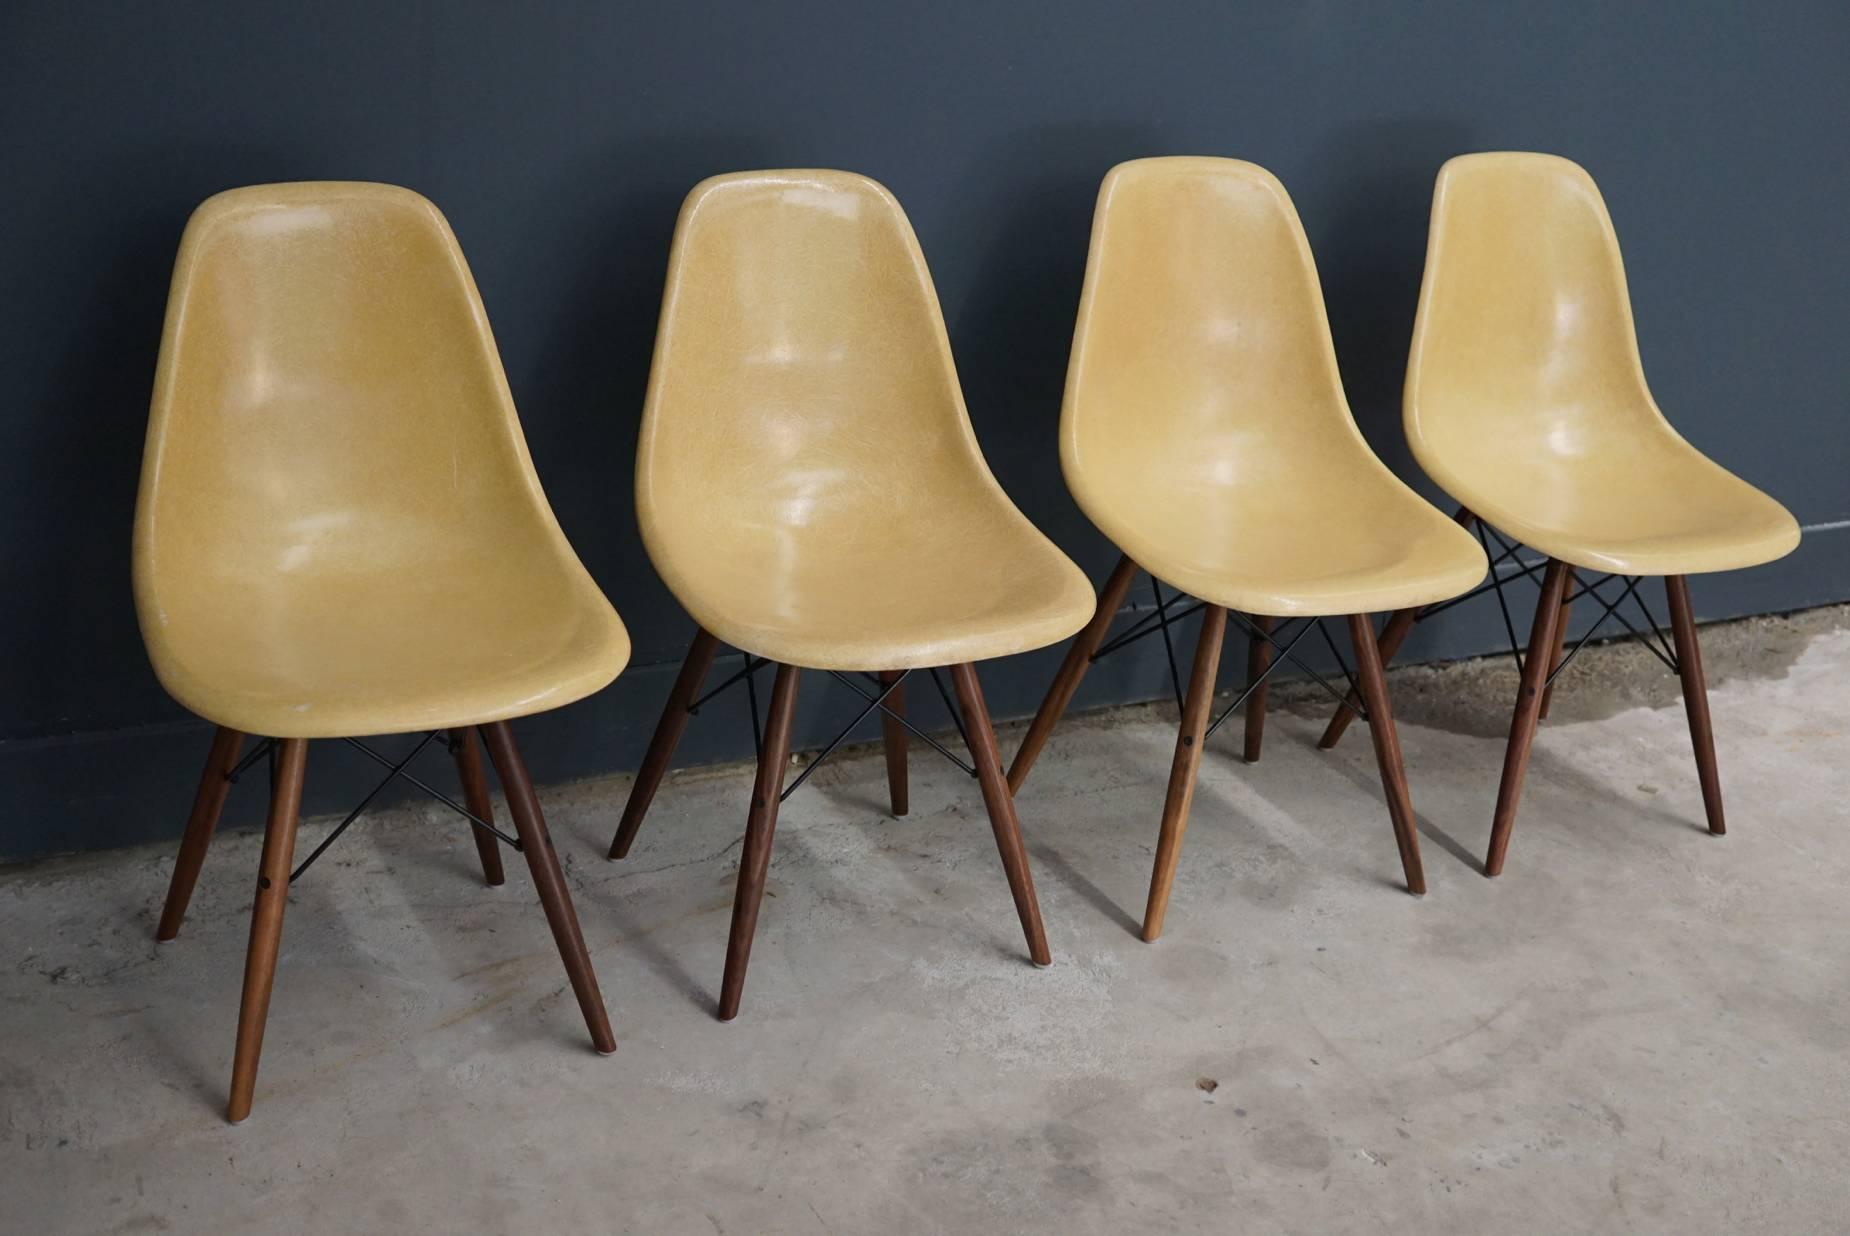 American Ochre DSW Chairs by Charles and Ray Eames, 1950s, Set of Four